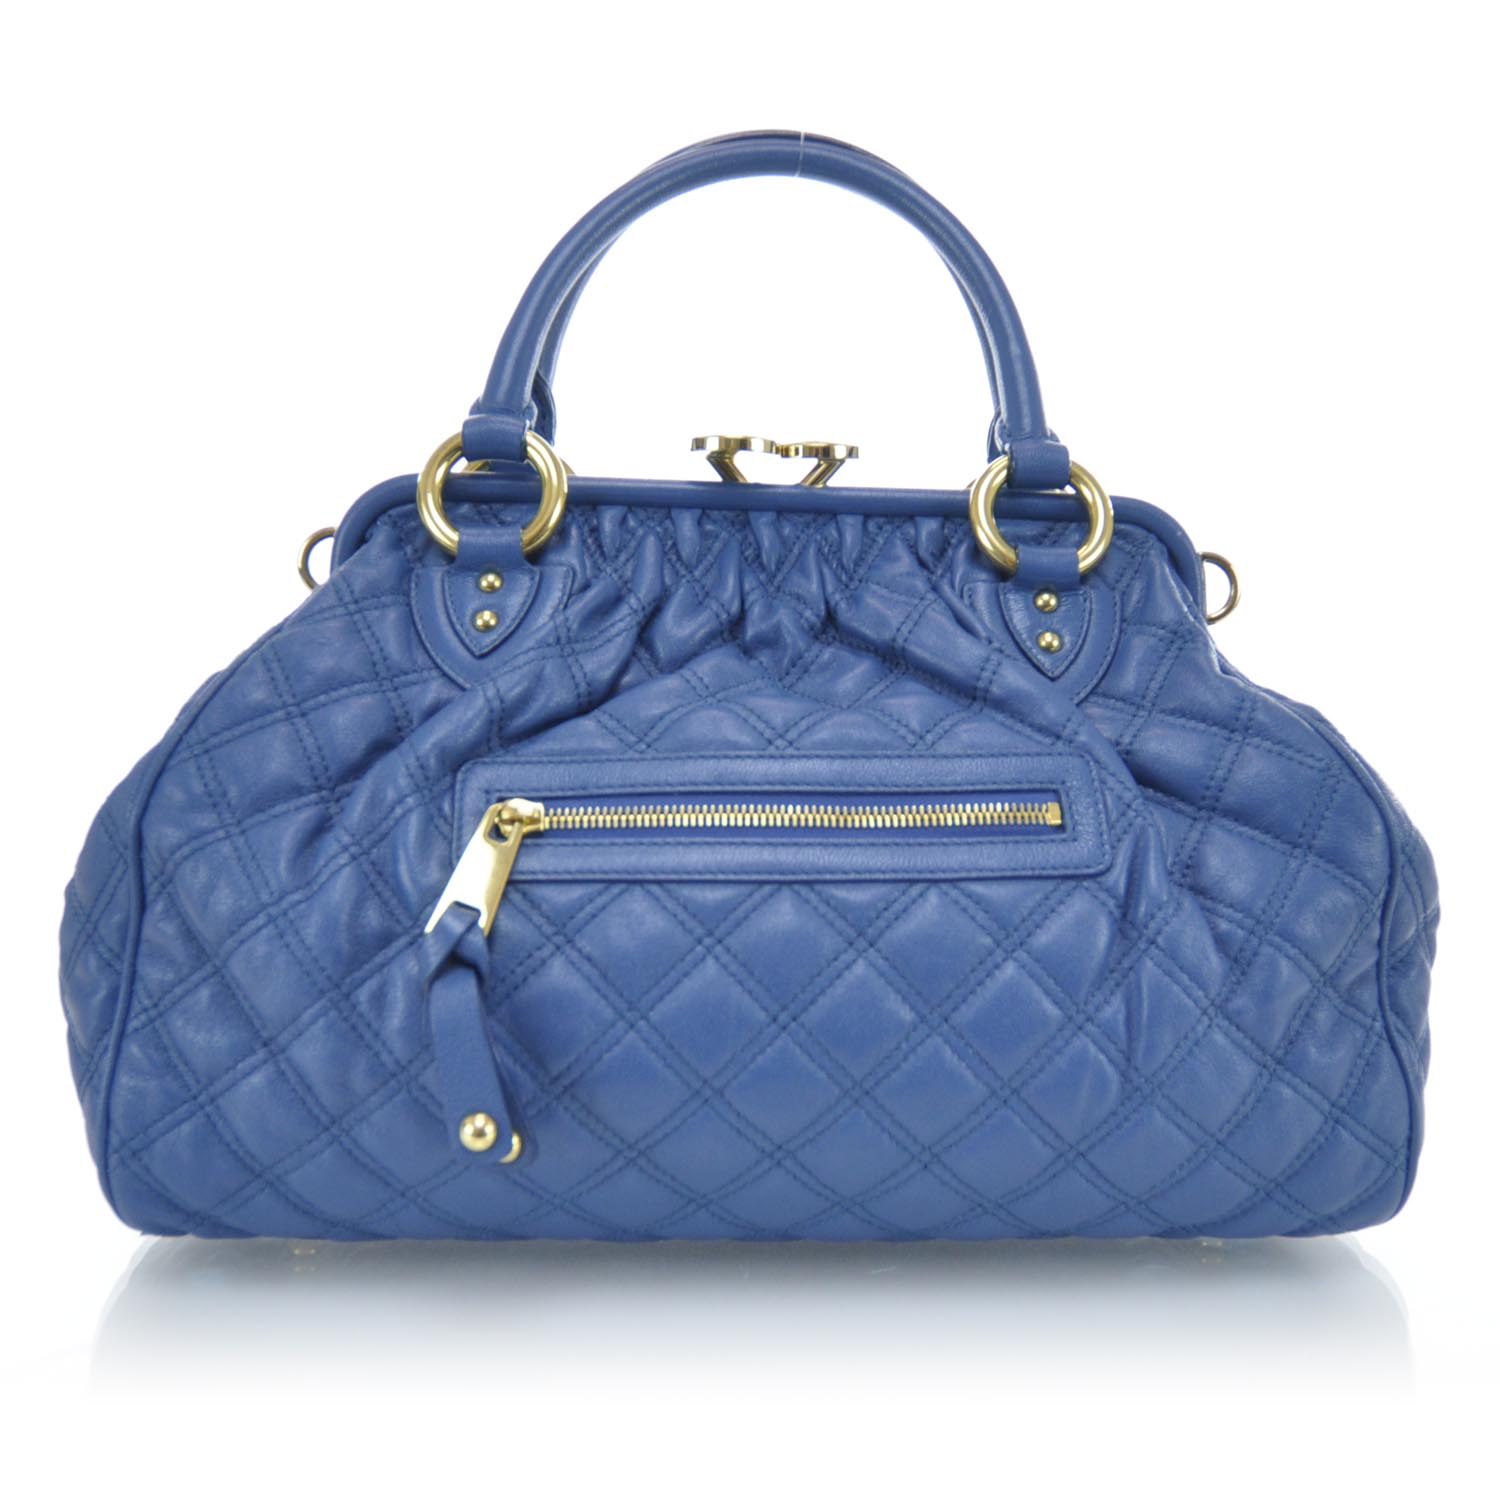 MARC JACOBS Quilted Leather Stam Marine 30197 | FASHIONPHILE